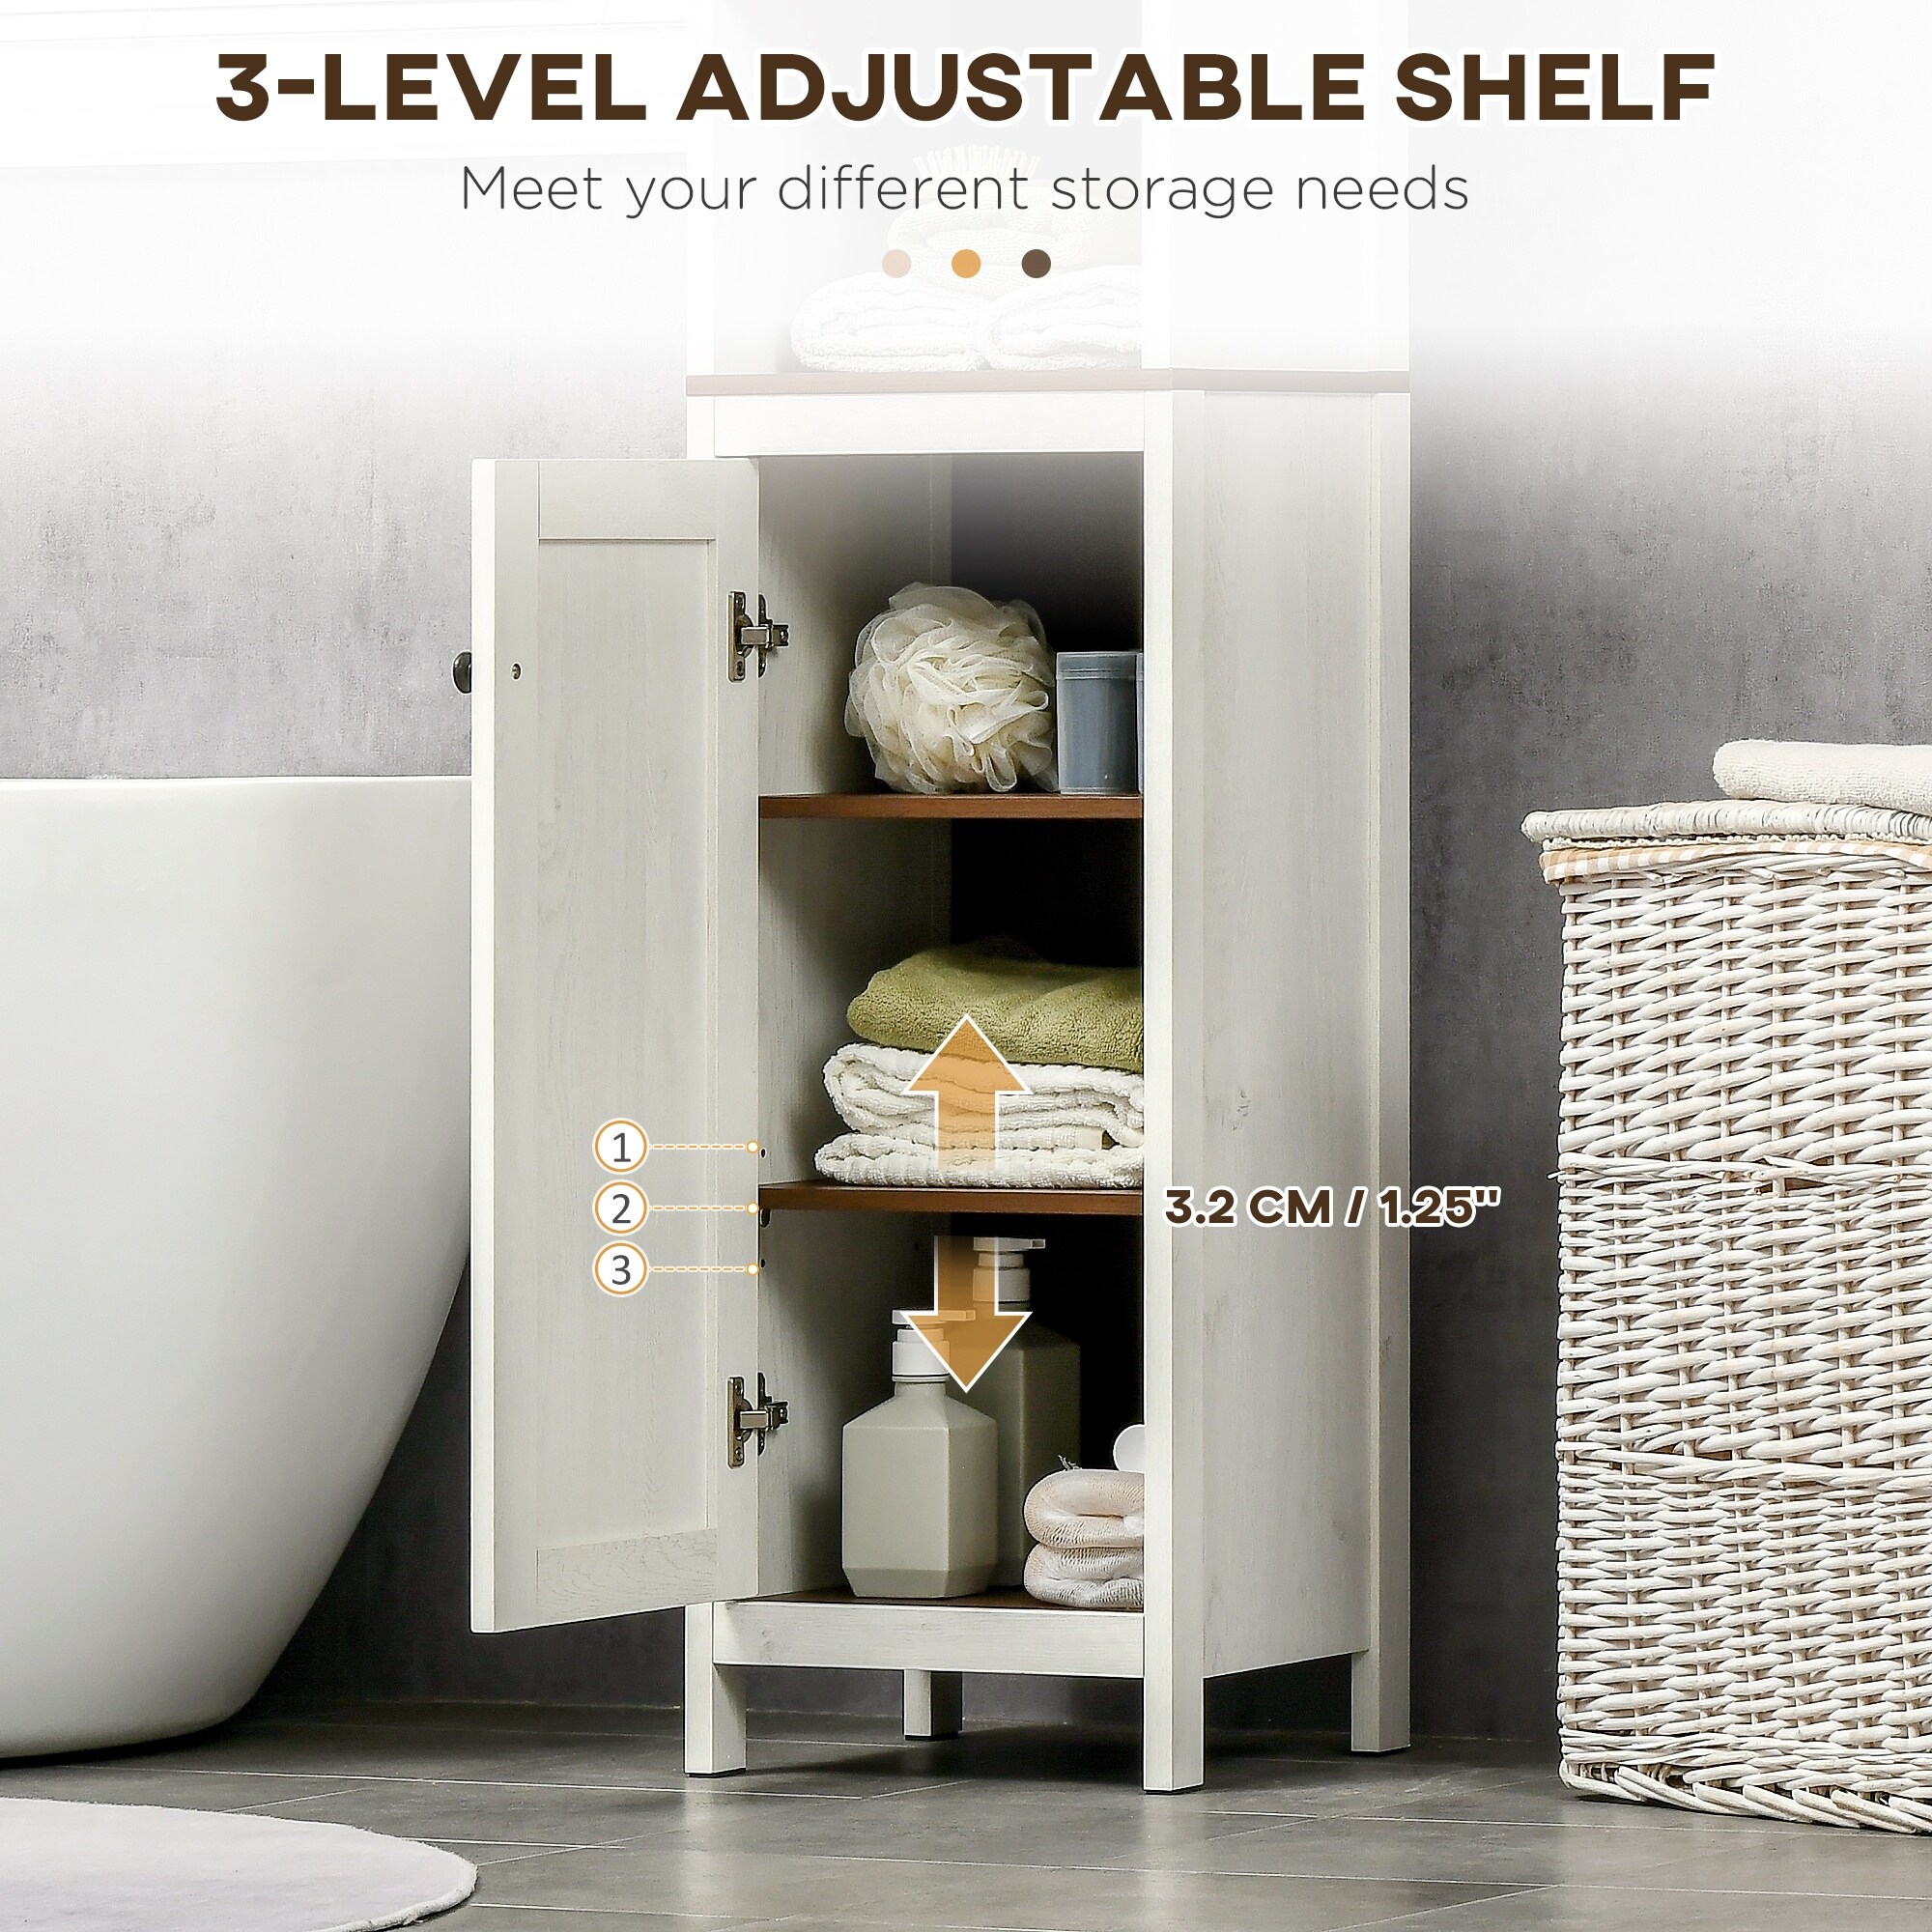 https://ak1.ostkcdn.com/images/products/is/images/direct/acc7e16eab2667f5fbeb4277368492c88f73836a/kleankin-Tall-Bathroom-Storage-Cabinet%2C-Freestanding-Tower-Cabinet-with-3-Open-Shelves-and-Adjustable-Shelf%2C-Antique-White.jpg